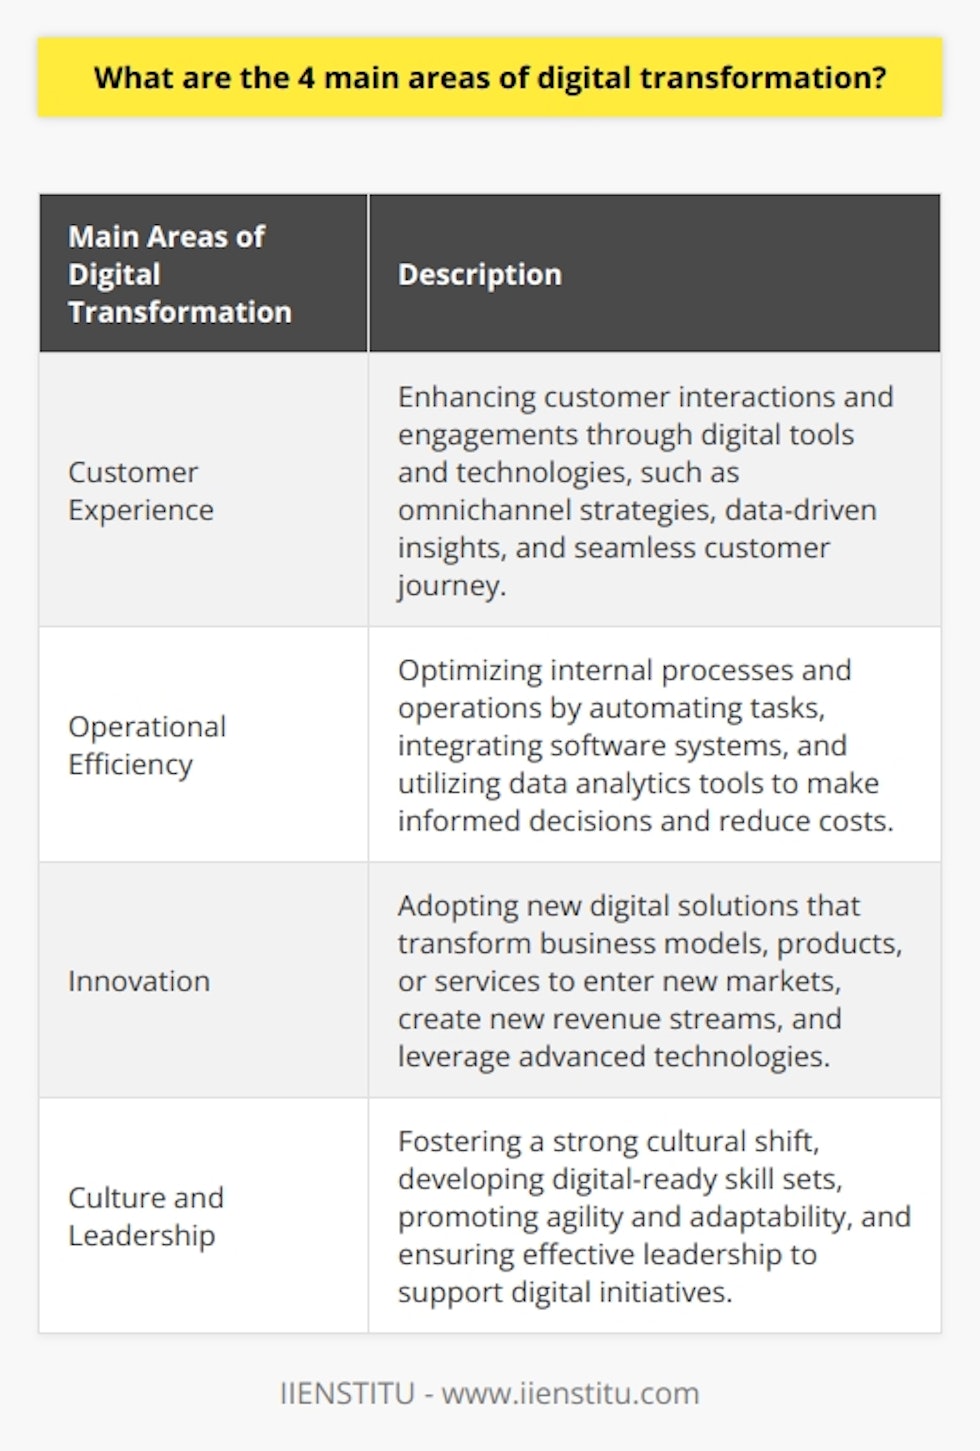 Digital transformation is a process that involves implementing technological integration across various domains to improve business productivity and effectiveness. There are four main areas of digital transformation: customer experience, operational efficiency, innovation, and culture and leadership.The first area, customer experience, focuses on enhancing how customers interact and engage with a business. In order to stay competitive, businesses must adopt digital tools and technologies to provide personalized experiences for their customers. This includes adopting omnichannel strategies, leveraging data-driven insights to address customer needs proactively, and creating a seamless customer journey.The second area, operational efficiency, aims to optimize a company's internal processes and operations through the use of digital technologies. This involves automating repetitive tasks, integrating software systems to streamline information flow, and utilizing data analytics tools to make informed decisions. By implementing these digital initiatives, businesses can streamline their operations and reduce costs.The third area, innovation, involves adopting new digital solutions that transform existing business models, products, or services. Businesses that embrace digital transformation look for opportunities to enter new markets, create new revenue streams, and leverage advanced technologies such as artificial intelligence, machine learning, big data, and the Internet of Things (IoT). By incorporating these digital solutions, businesses can drive innovation and stay ahead of their competitors.The fourth area of digital transformation is culture and leadership. This area emphasizes the need for a strong cultural shift and effective leadership to support digital initiatives. Businesses must develop digital-ready skill sets among their employees, foster a culture of agility and adaptability, and ensure that leadership fully embraces the digital mindset to effectively lead teams through the transformation process.In conclusion, focusing on customer experience, operational efficiency, innovation, and culture and leadership enables businesses to successfully implement digital transformation strategies. By taking a comprehensive approach, companies can remain competitive in the evolving digital landscape and unlock new opportunities for growth and success.